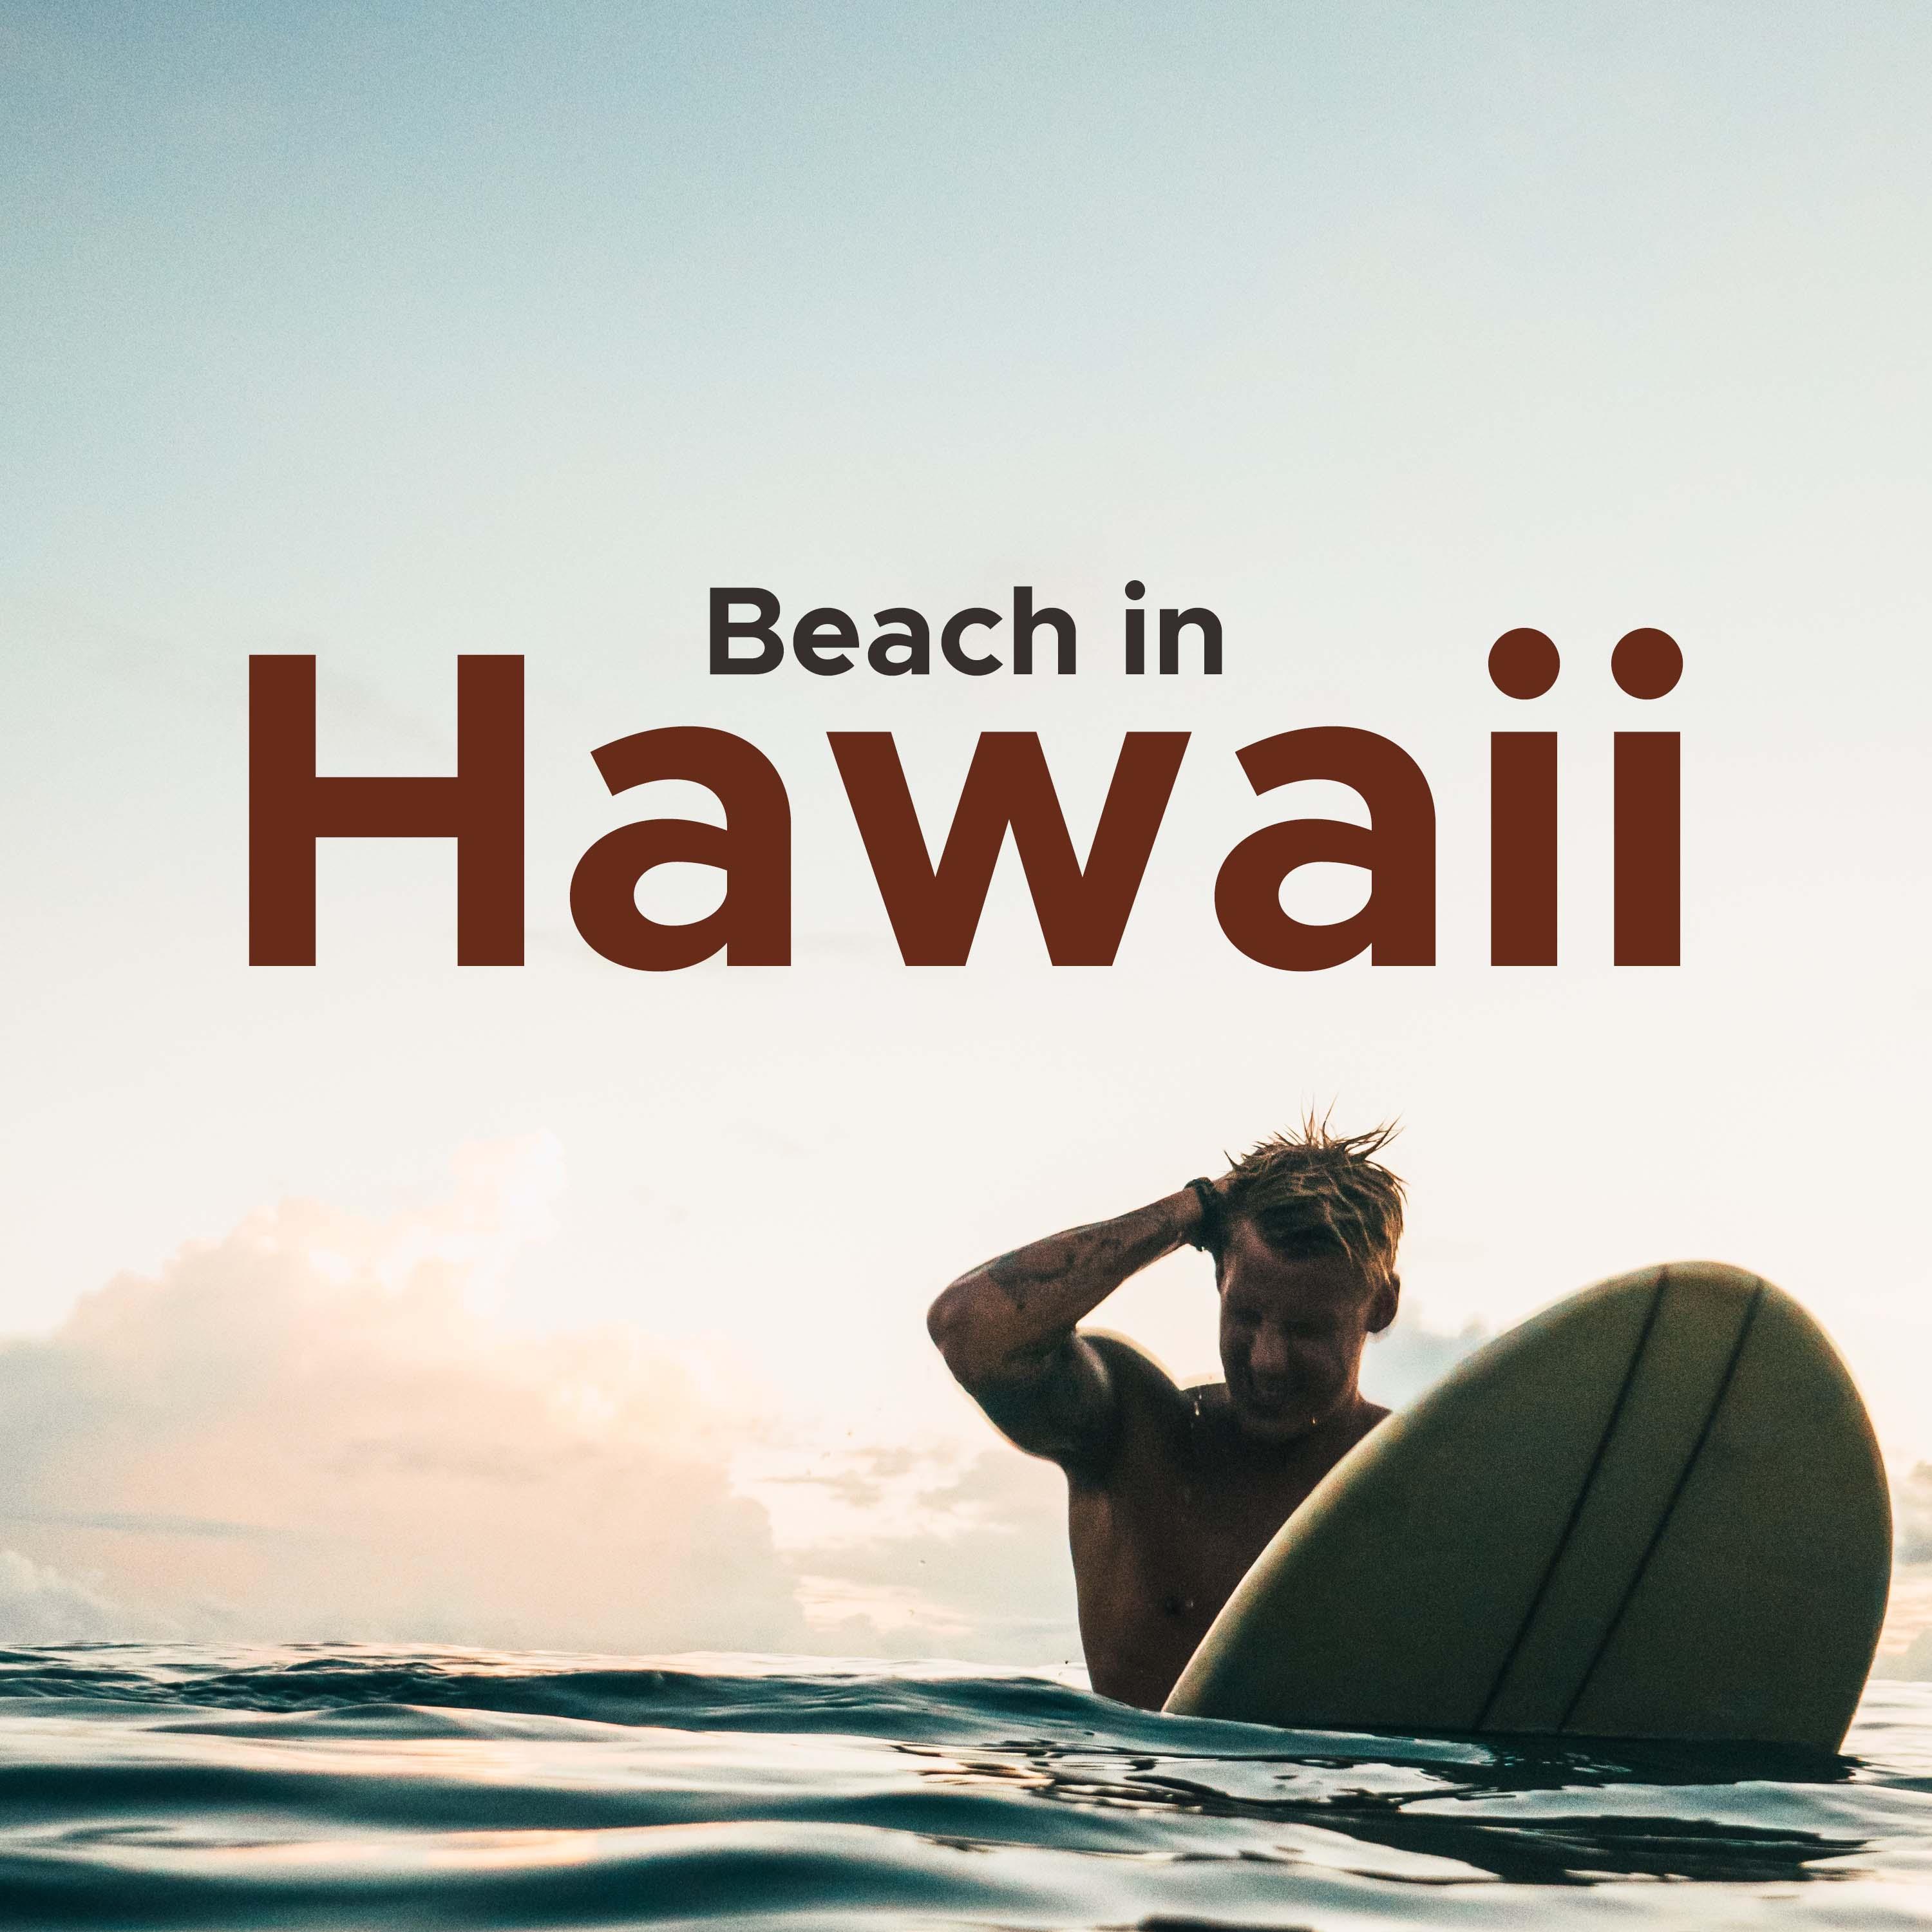 Beach in Hawaii - Best On the Road CD for Summer Holidays and Hawaii Beach Chillout